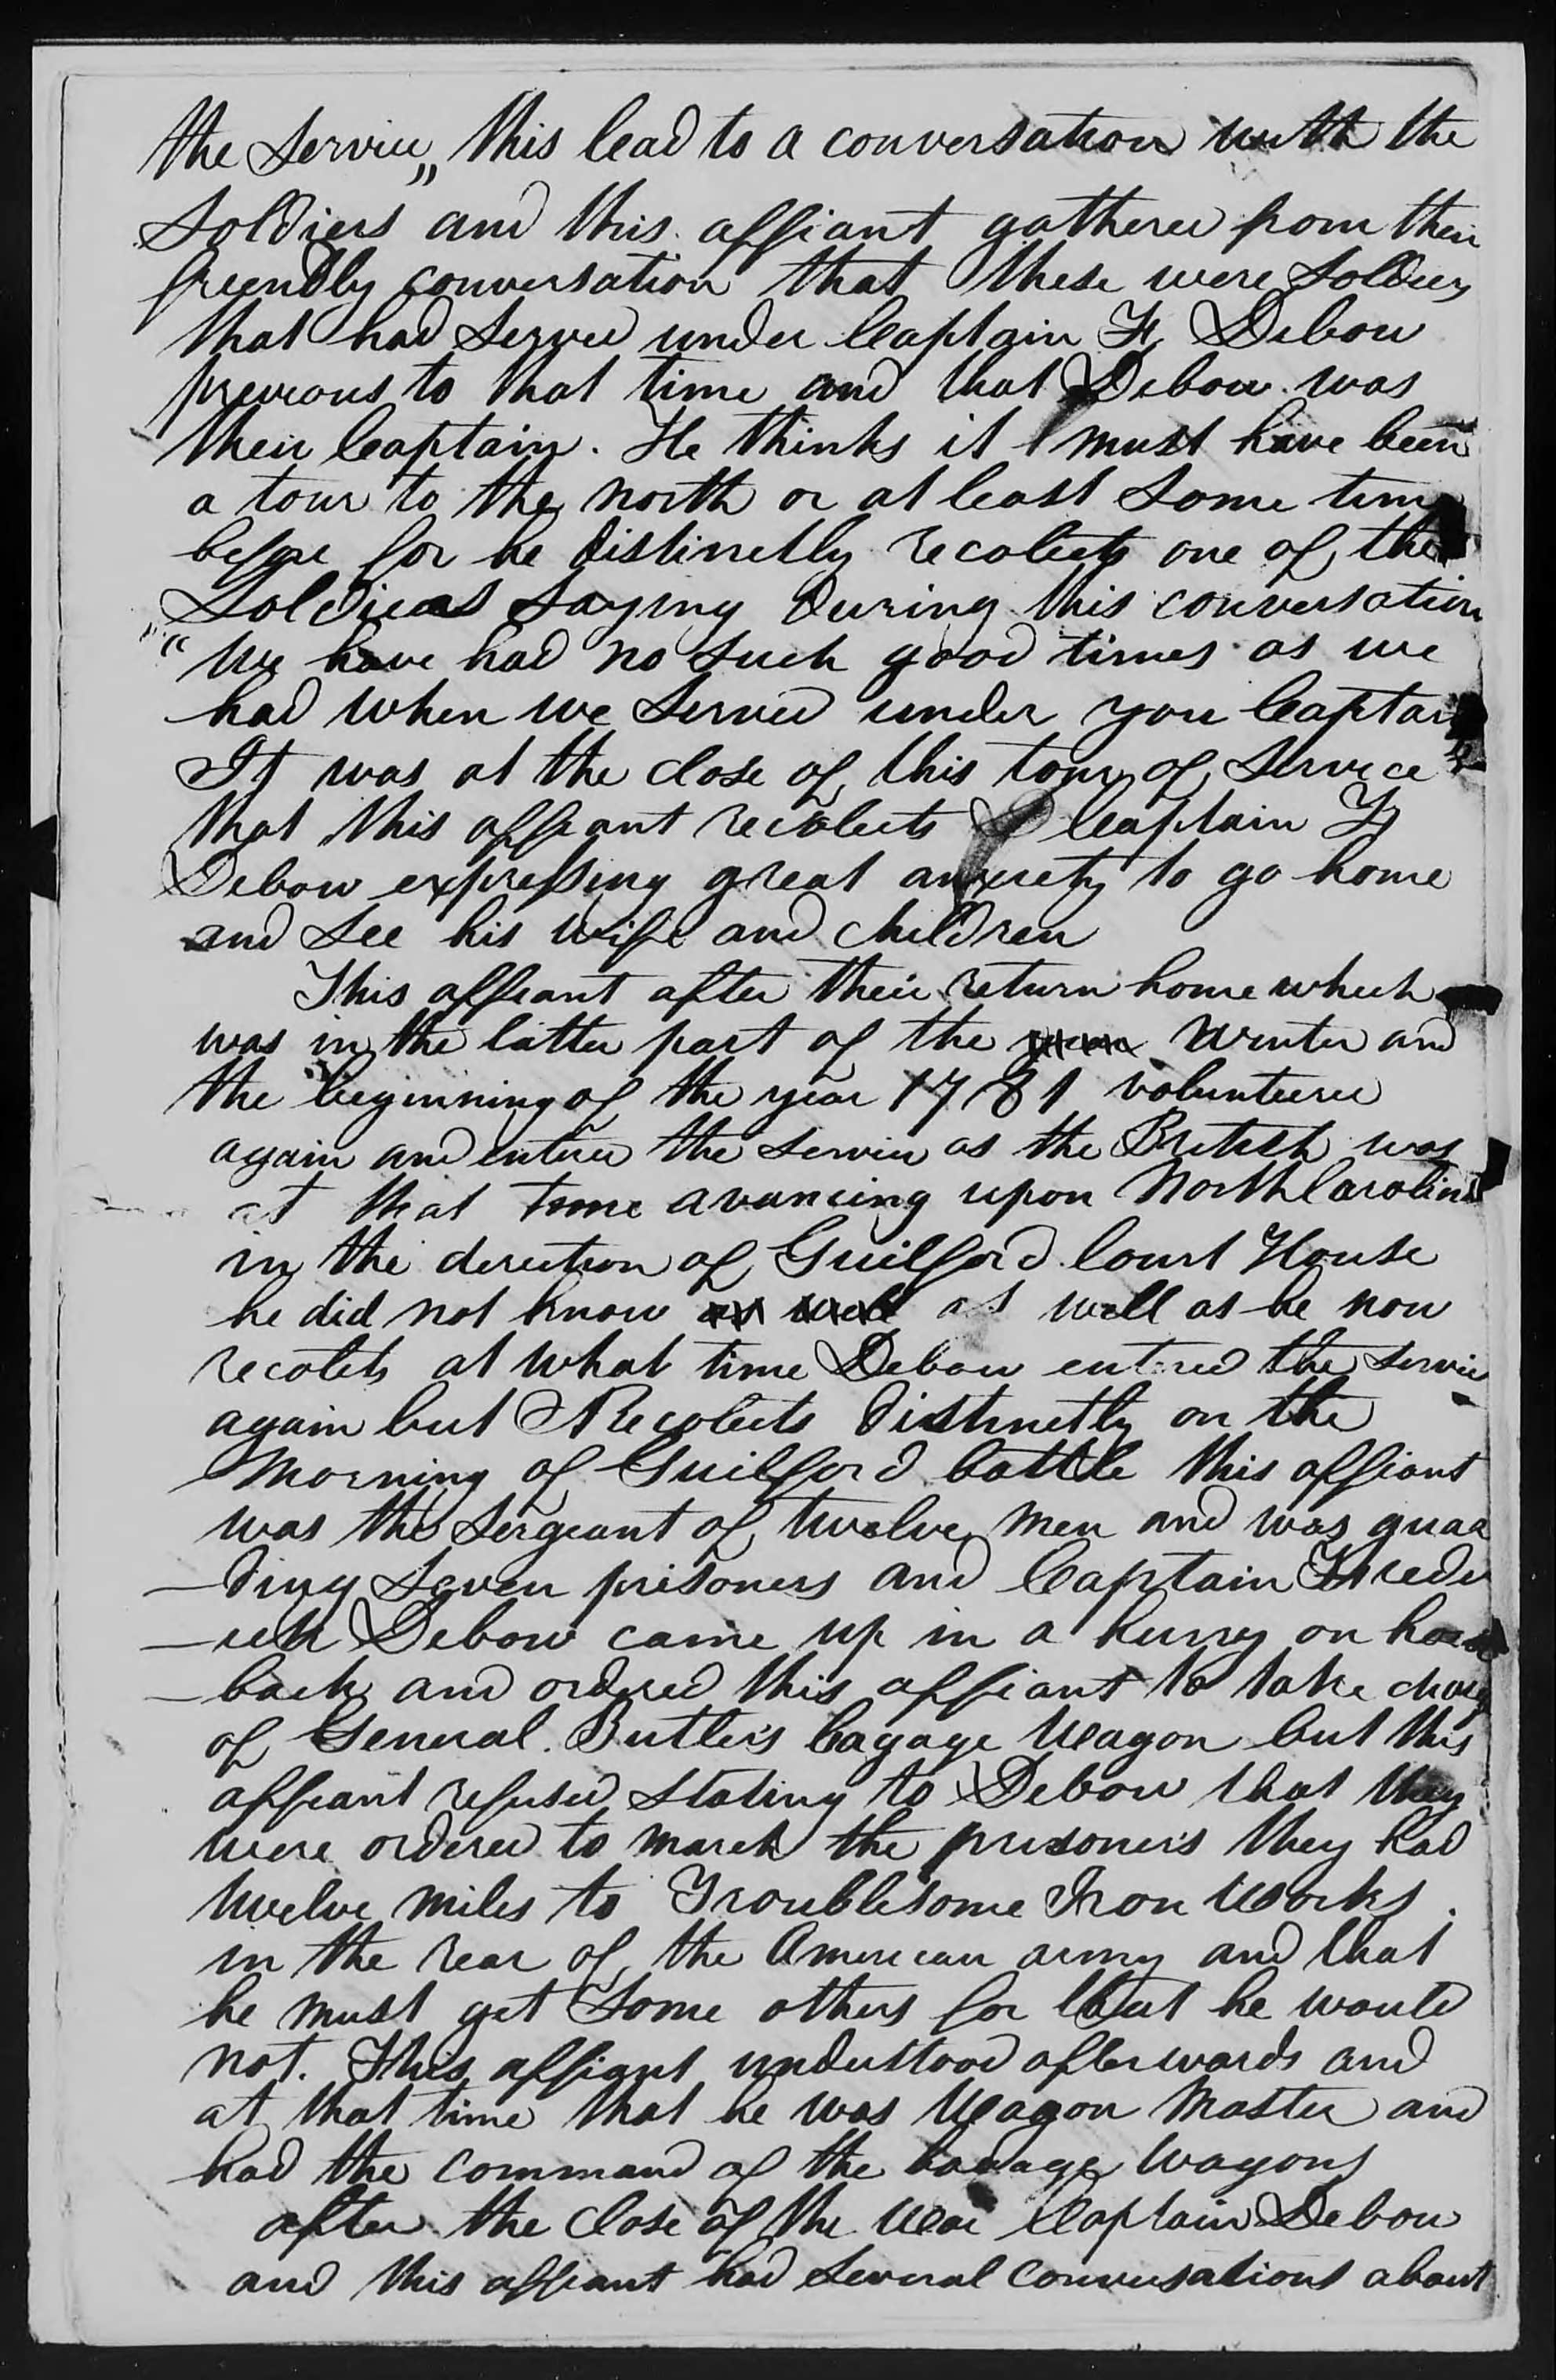 Affidavit of Alexander McMennamy in support of a Pension Claim for Rachel Debow, 14 August 1837, page 2